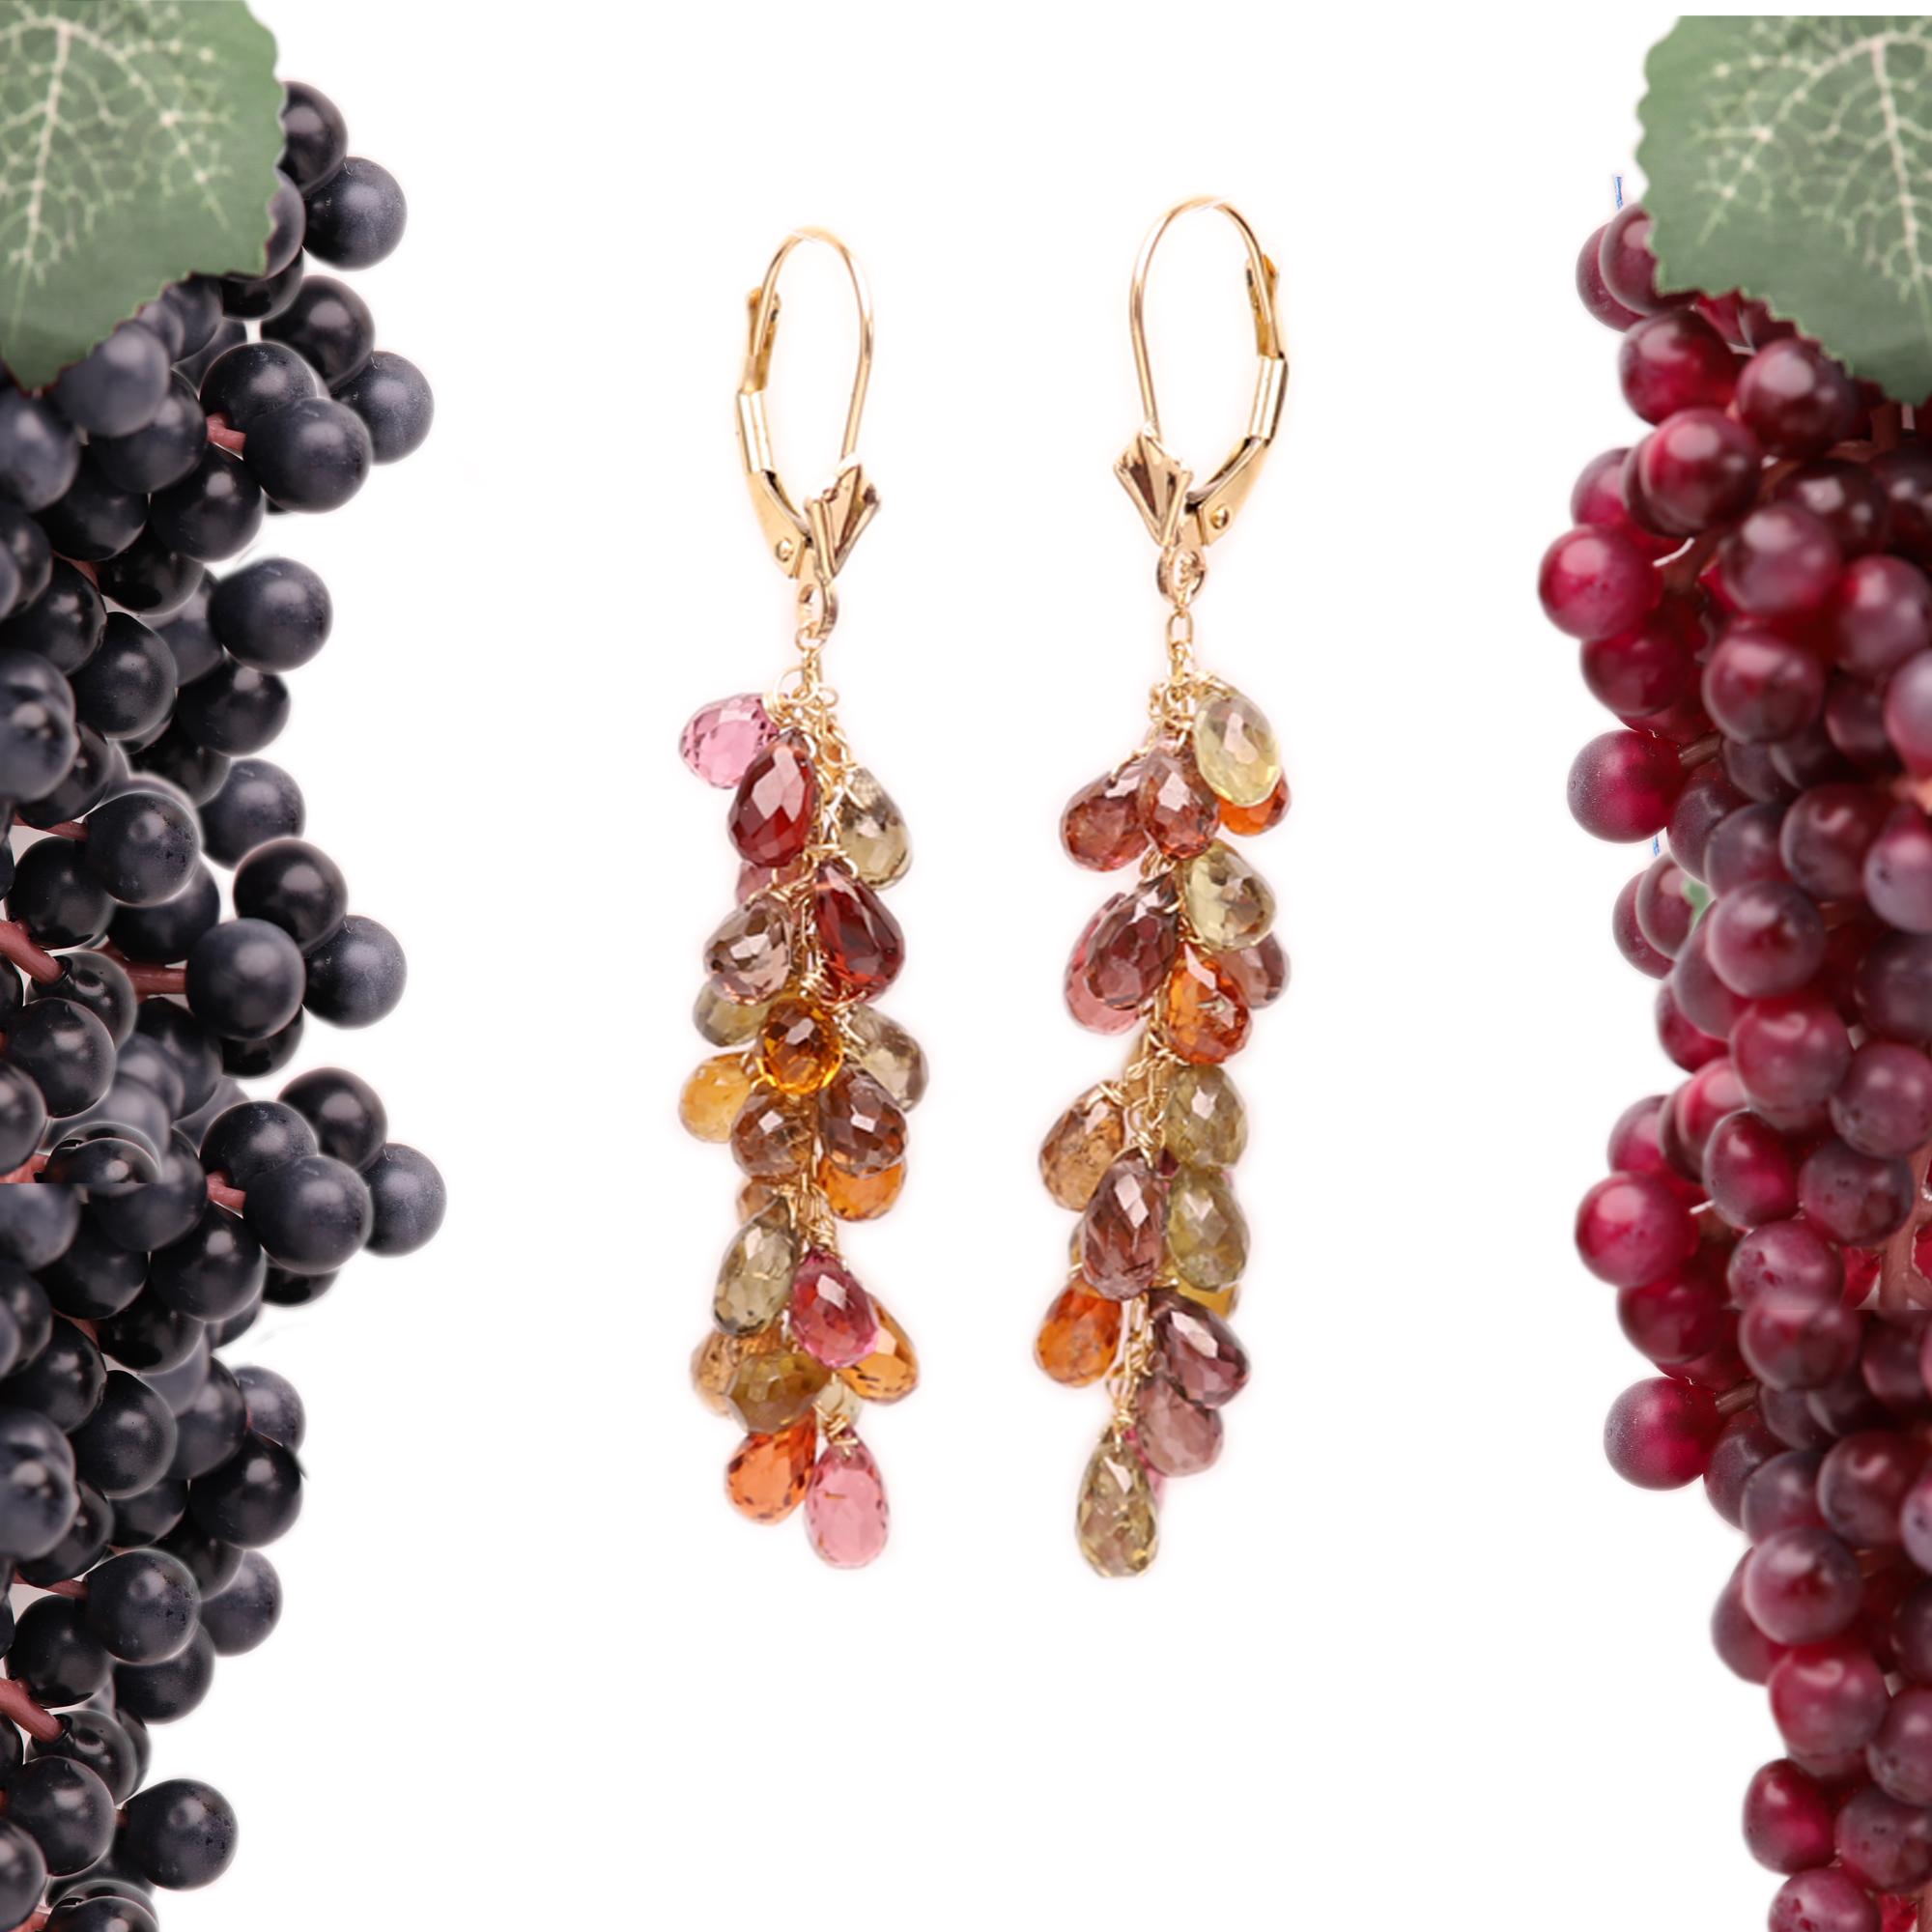 New Brilliant Colors Drops Earrings
Grape Vine style Dangling Earrings
Natural gemstones mixed colors of Rhodolite briolette shape (tear drop) 
Lever back closure Solid 14k Yellow Gold
all the rest of the wire is Gold-filled type of metal
Dangle